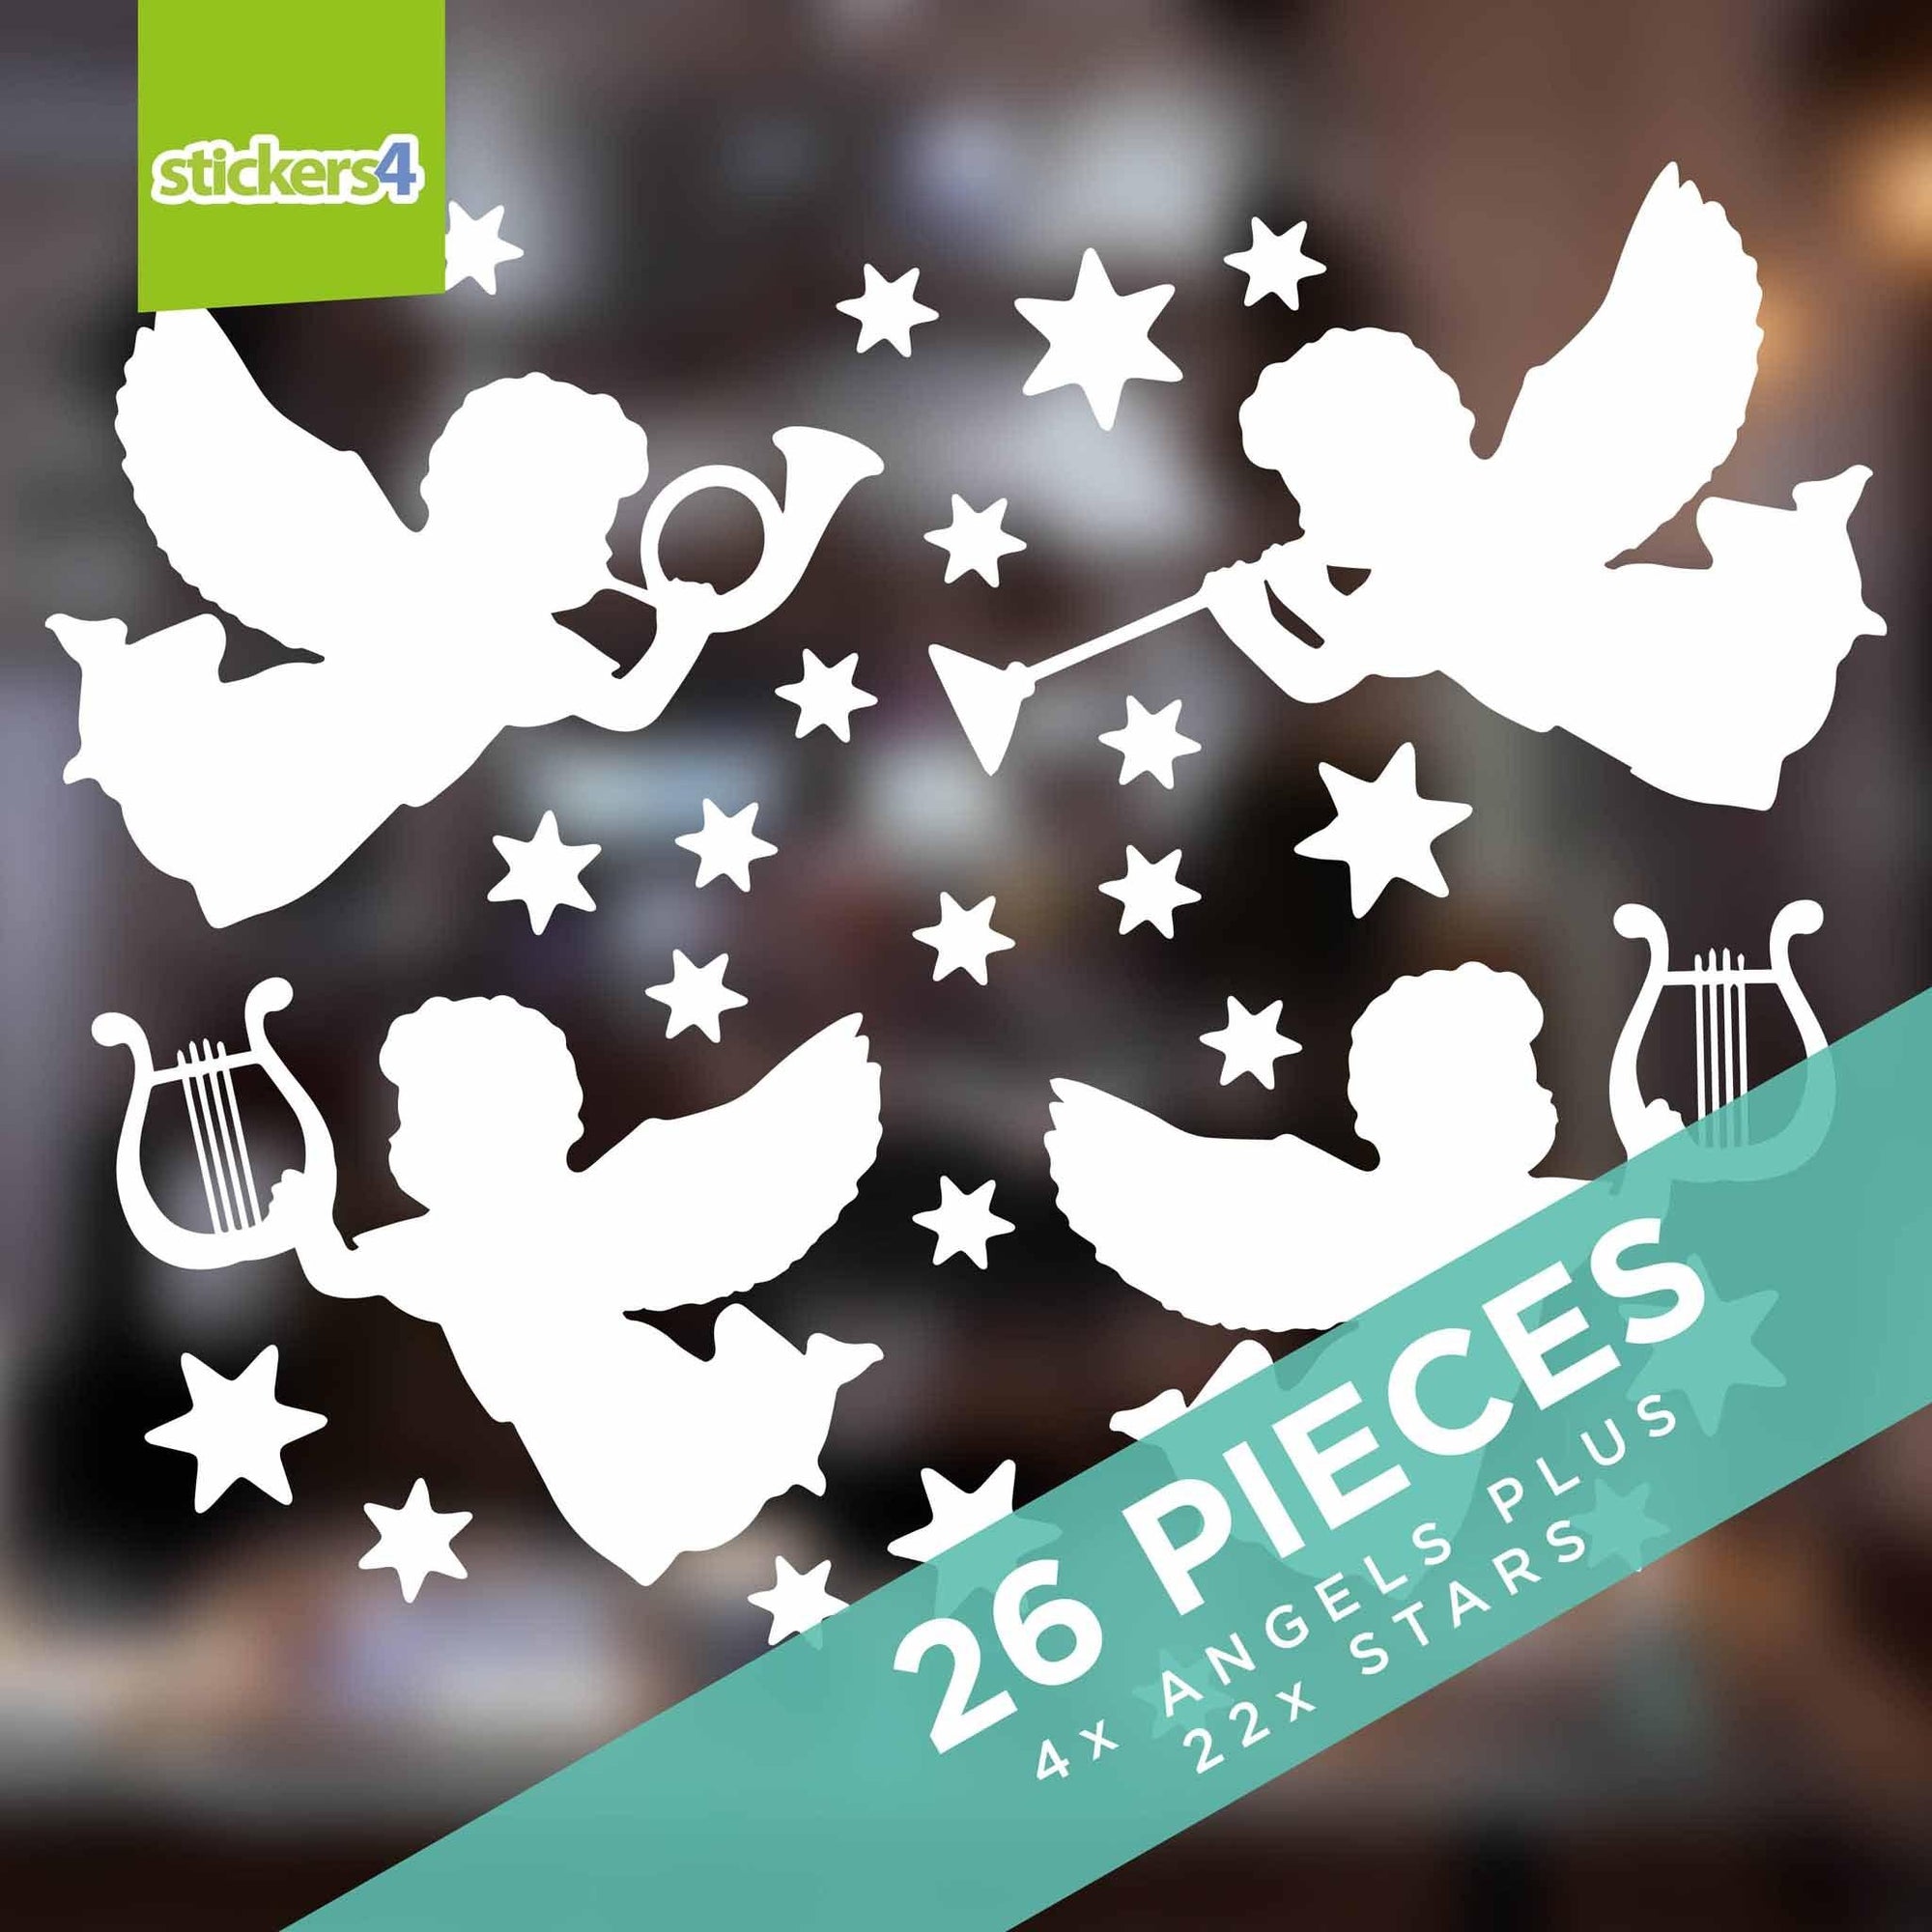 Set of White Angels & Stars Silhouette Window Cling Stickers Christmas Window Display